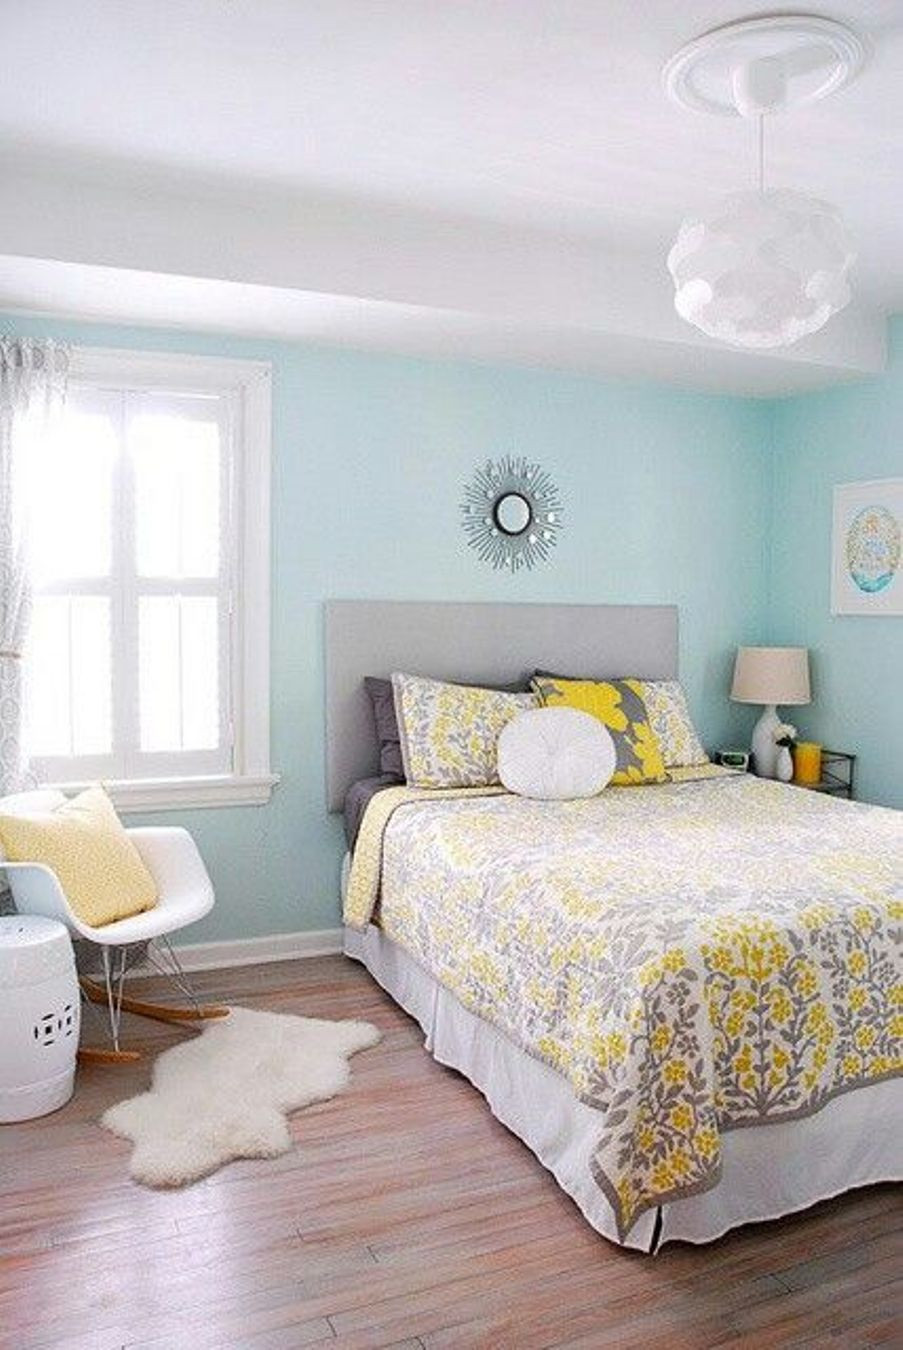 Best Color For Bedroom Walls
 Best Paint Colors for Small Room – Some Tips – HomesFeed